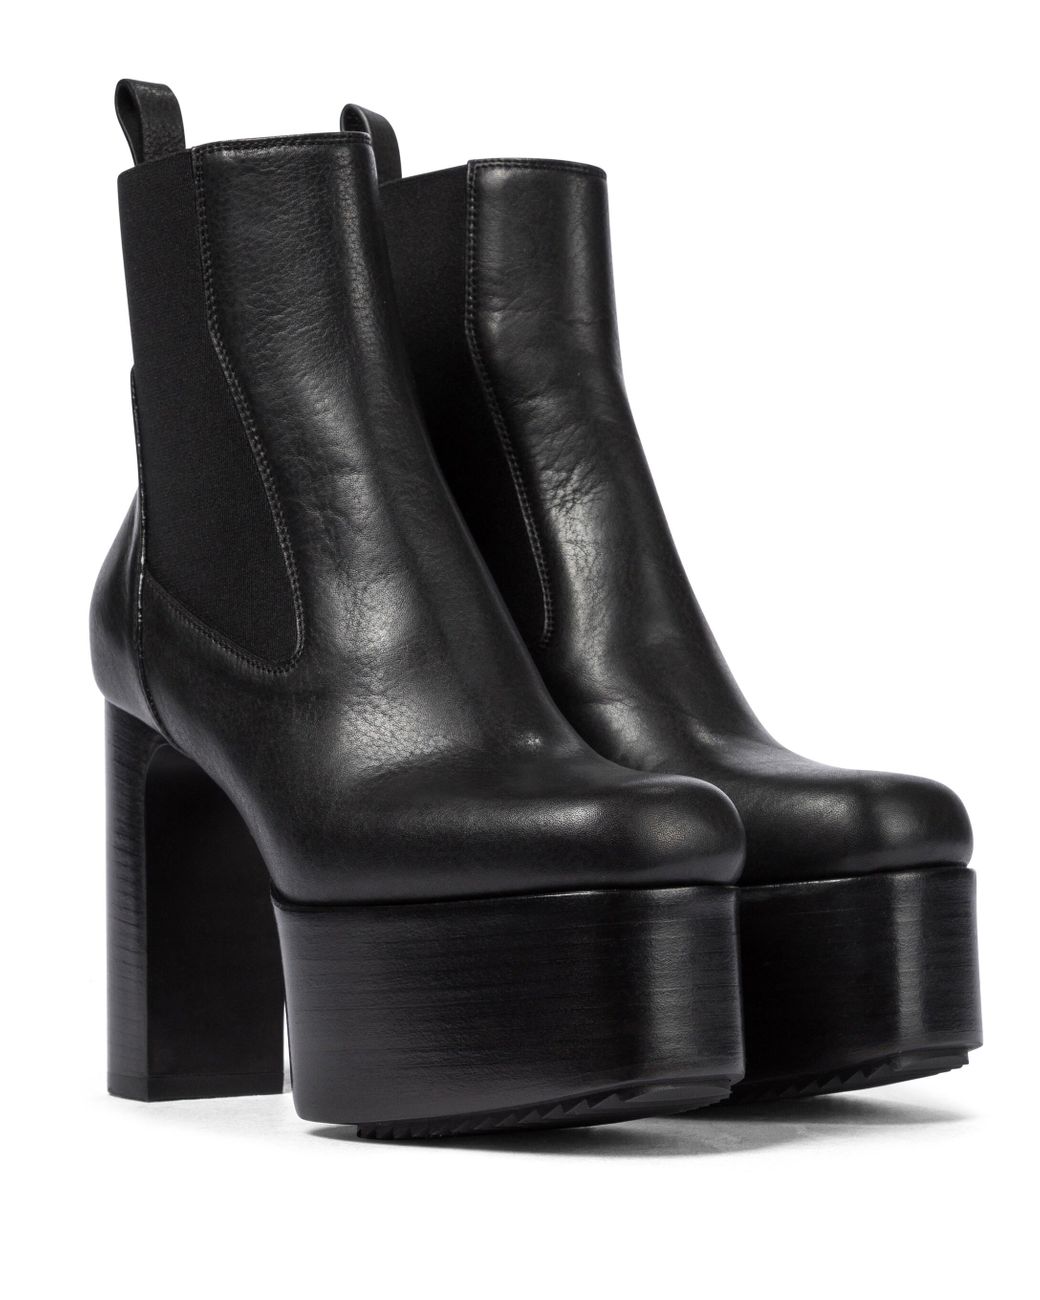 Rick Owens Kiss Leather Platform Ankle Boots in Black - Lyst